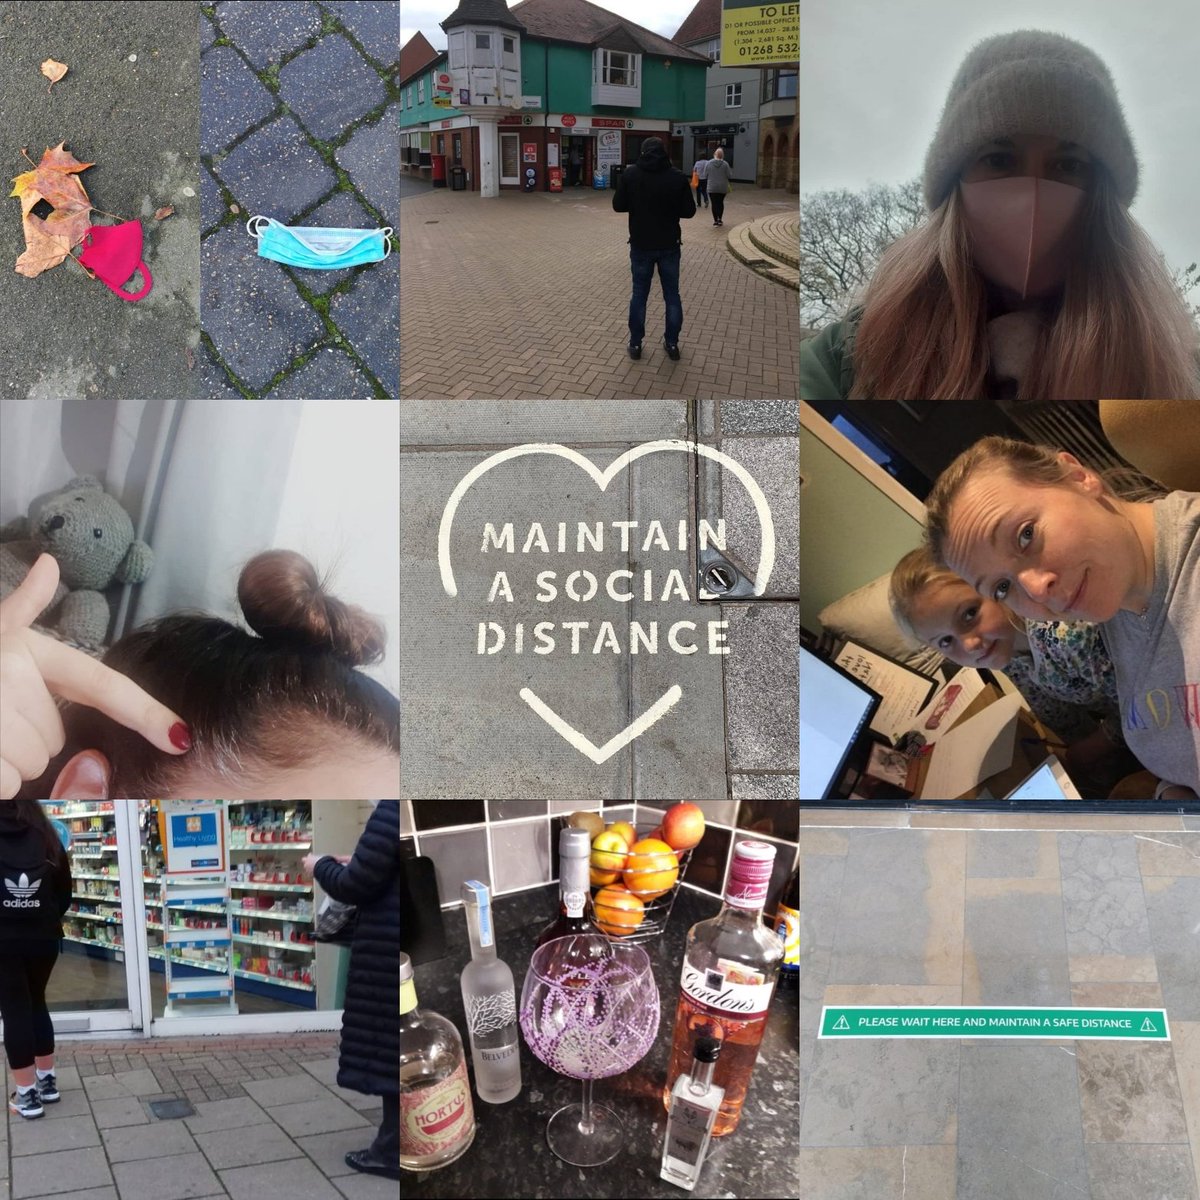 Photo Challenge! This month it was #TheNewNorm - from everything to masks on the ground, to grey hair, to bars in the kitchen, queues for everything! What is your 'new norm' now? #VirtualVixensWI #WomensInstitute #TheNewNorm #CovidLife #Covid #Masks #WFH #GreyHairDontCare #Swipe